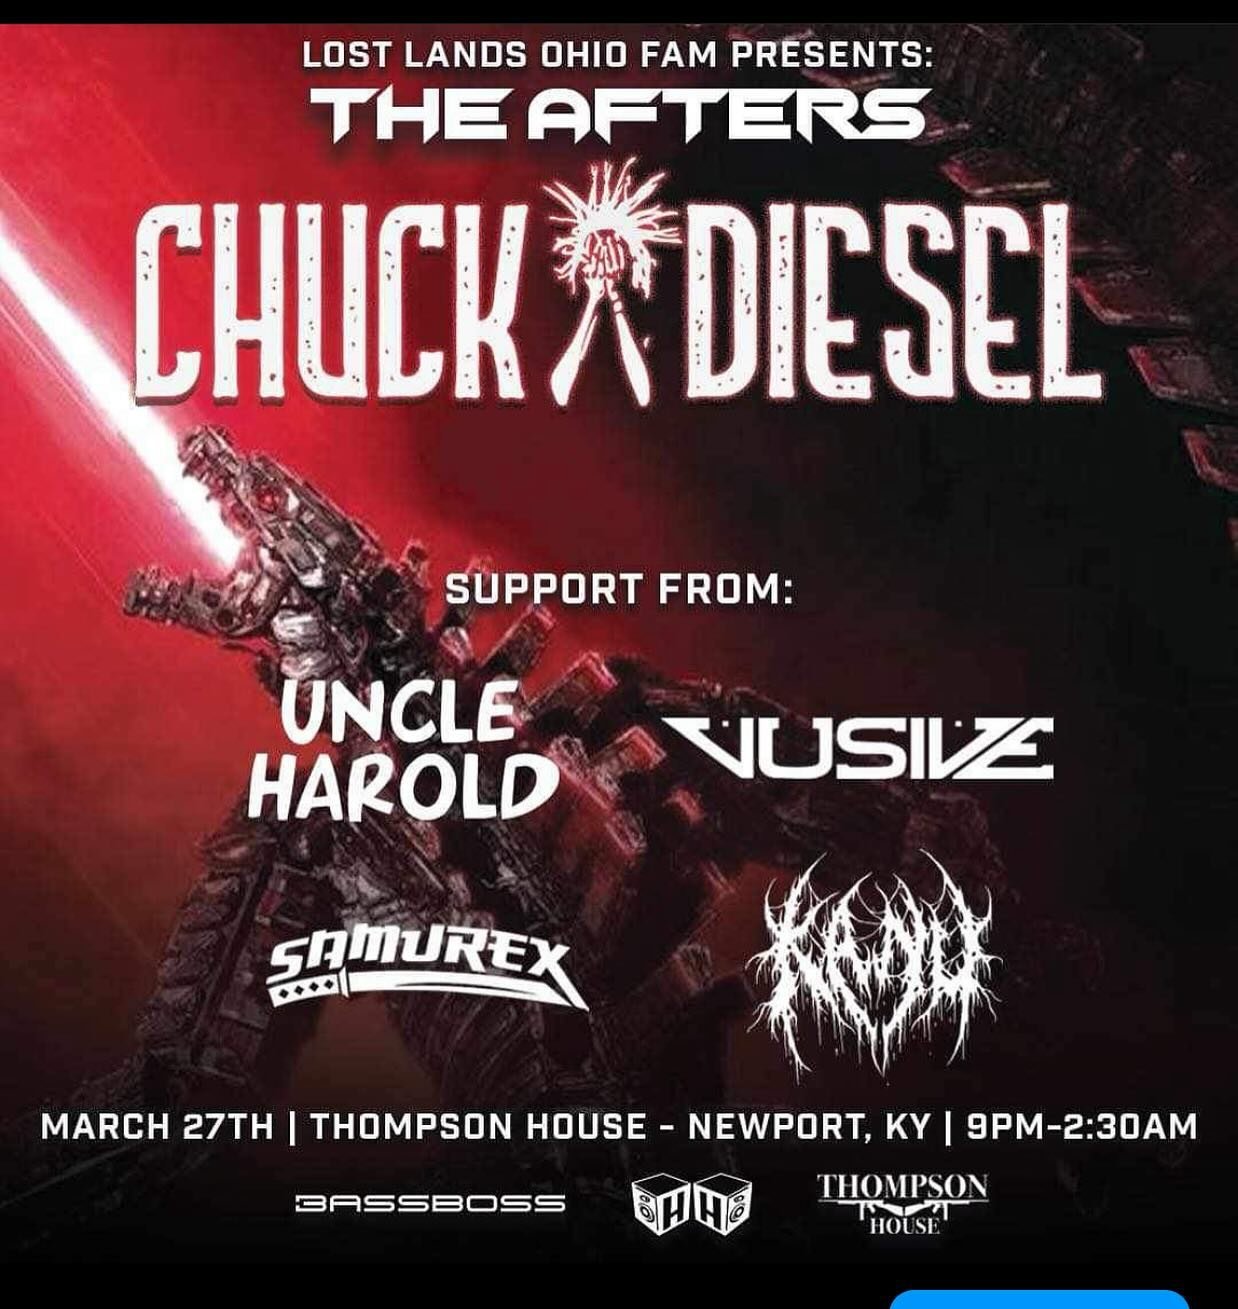 This Wednesday 3/27 @lost_lands_ohio_fam presents The Afters w/ @chuckdiesel__